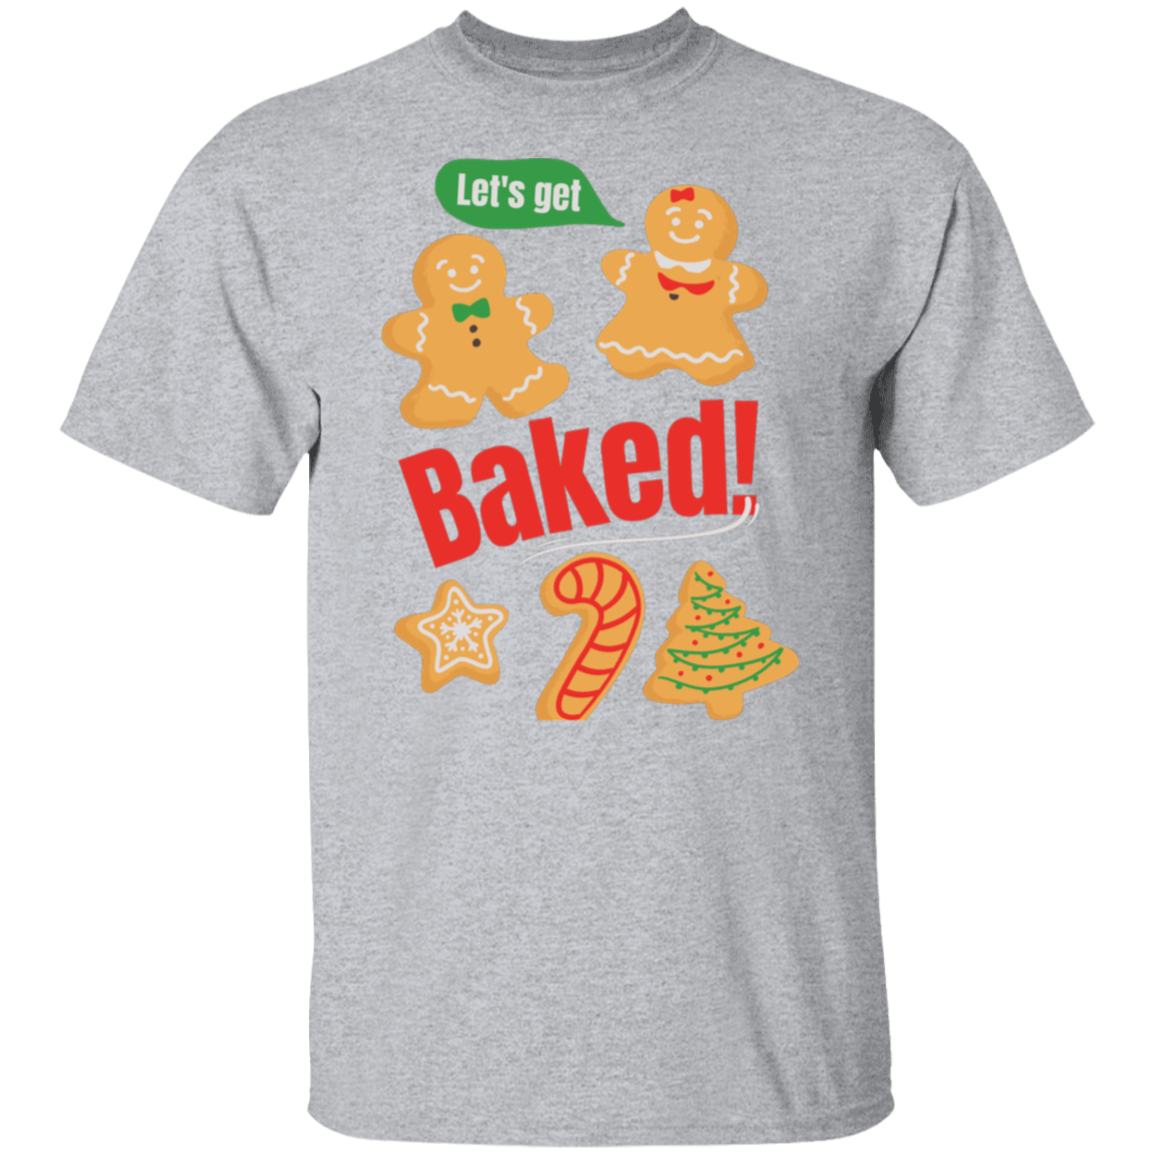 Let's get baked! T-Shirt